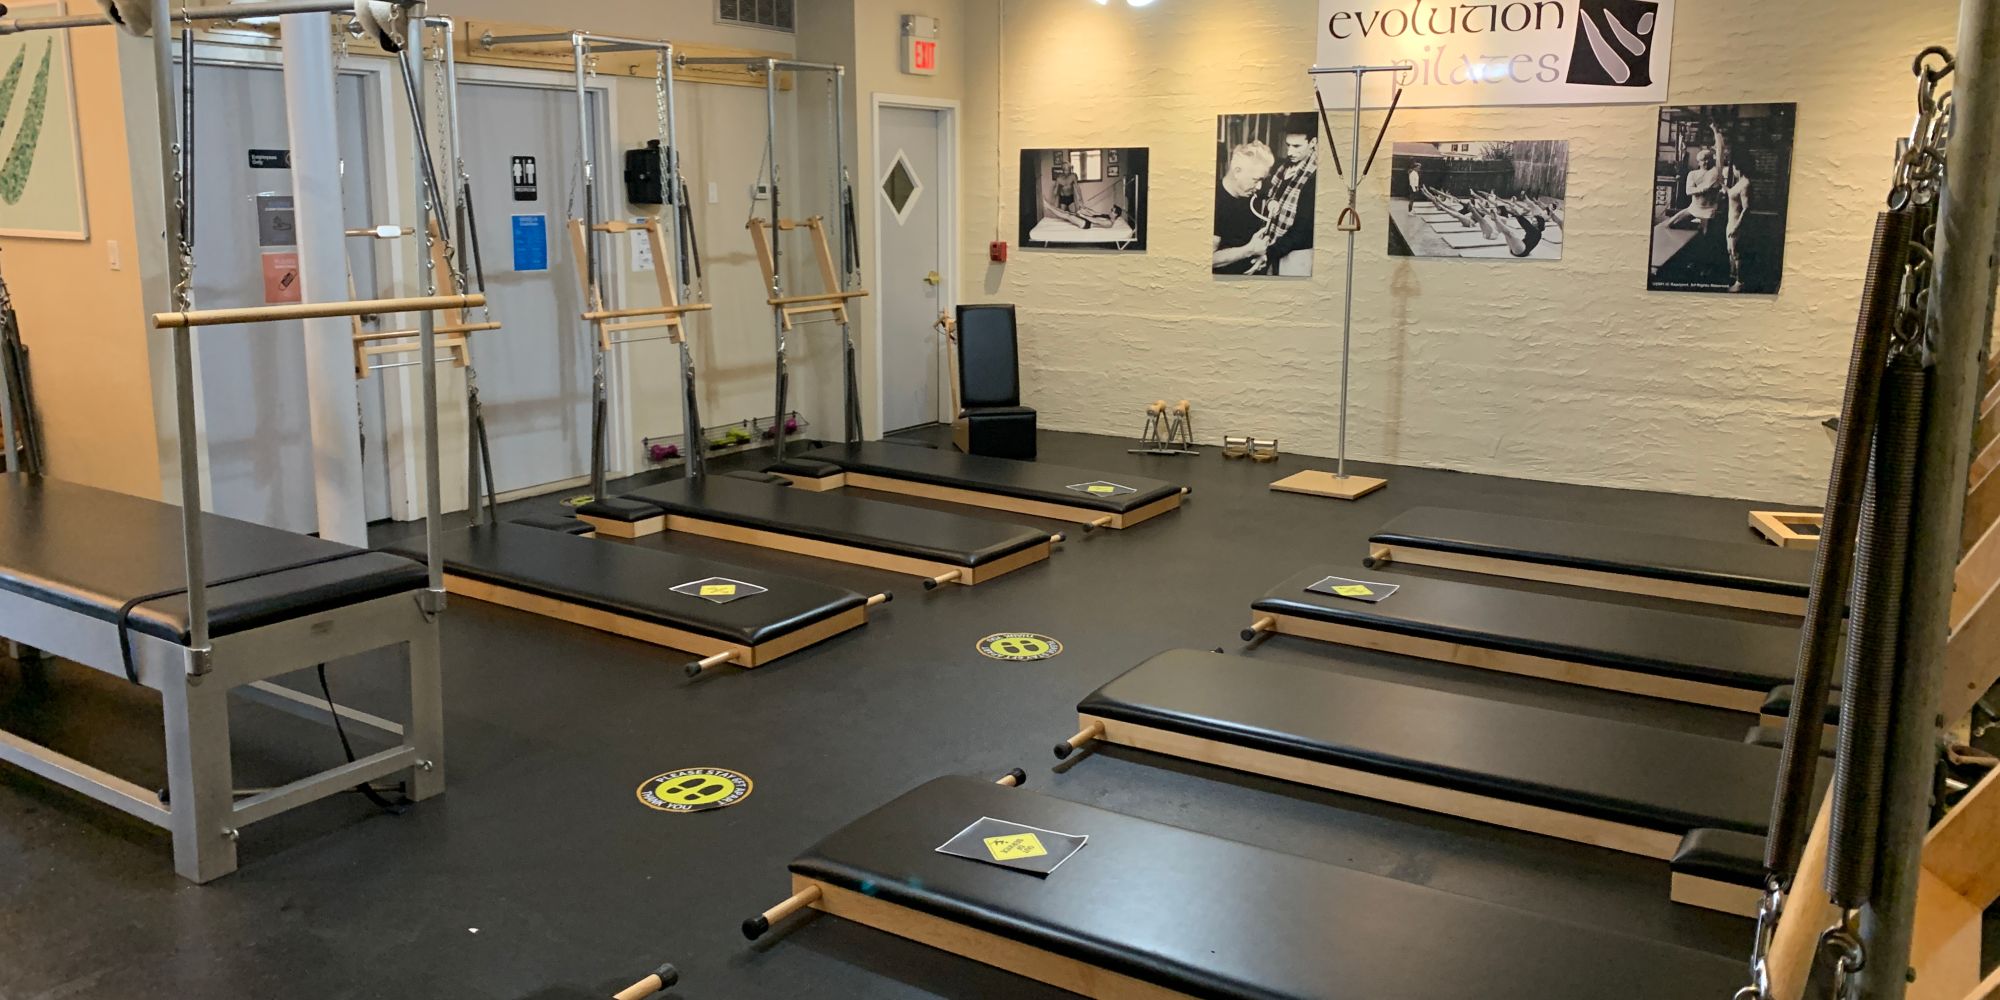 Fully equipped classical Pilates studio in Port Washington NY